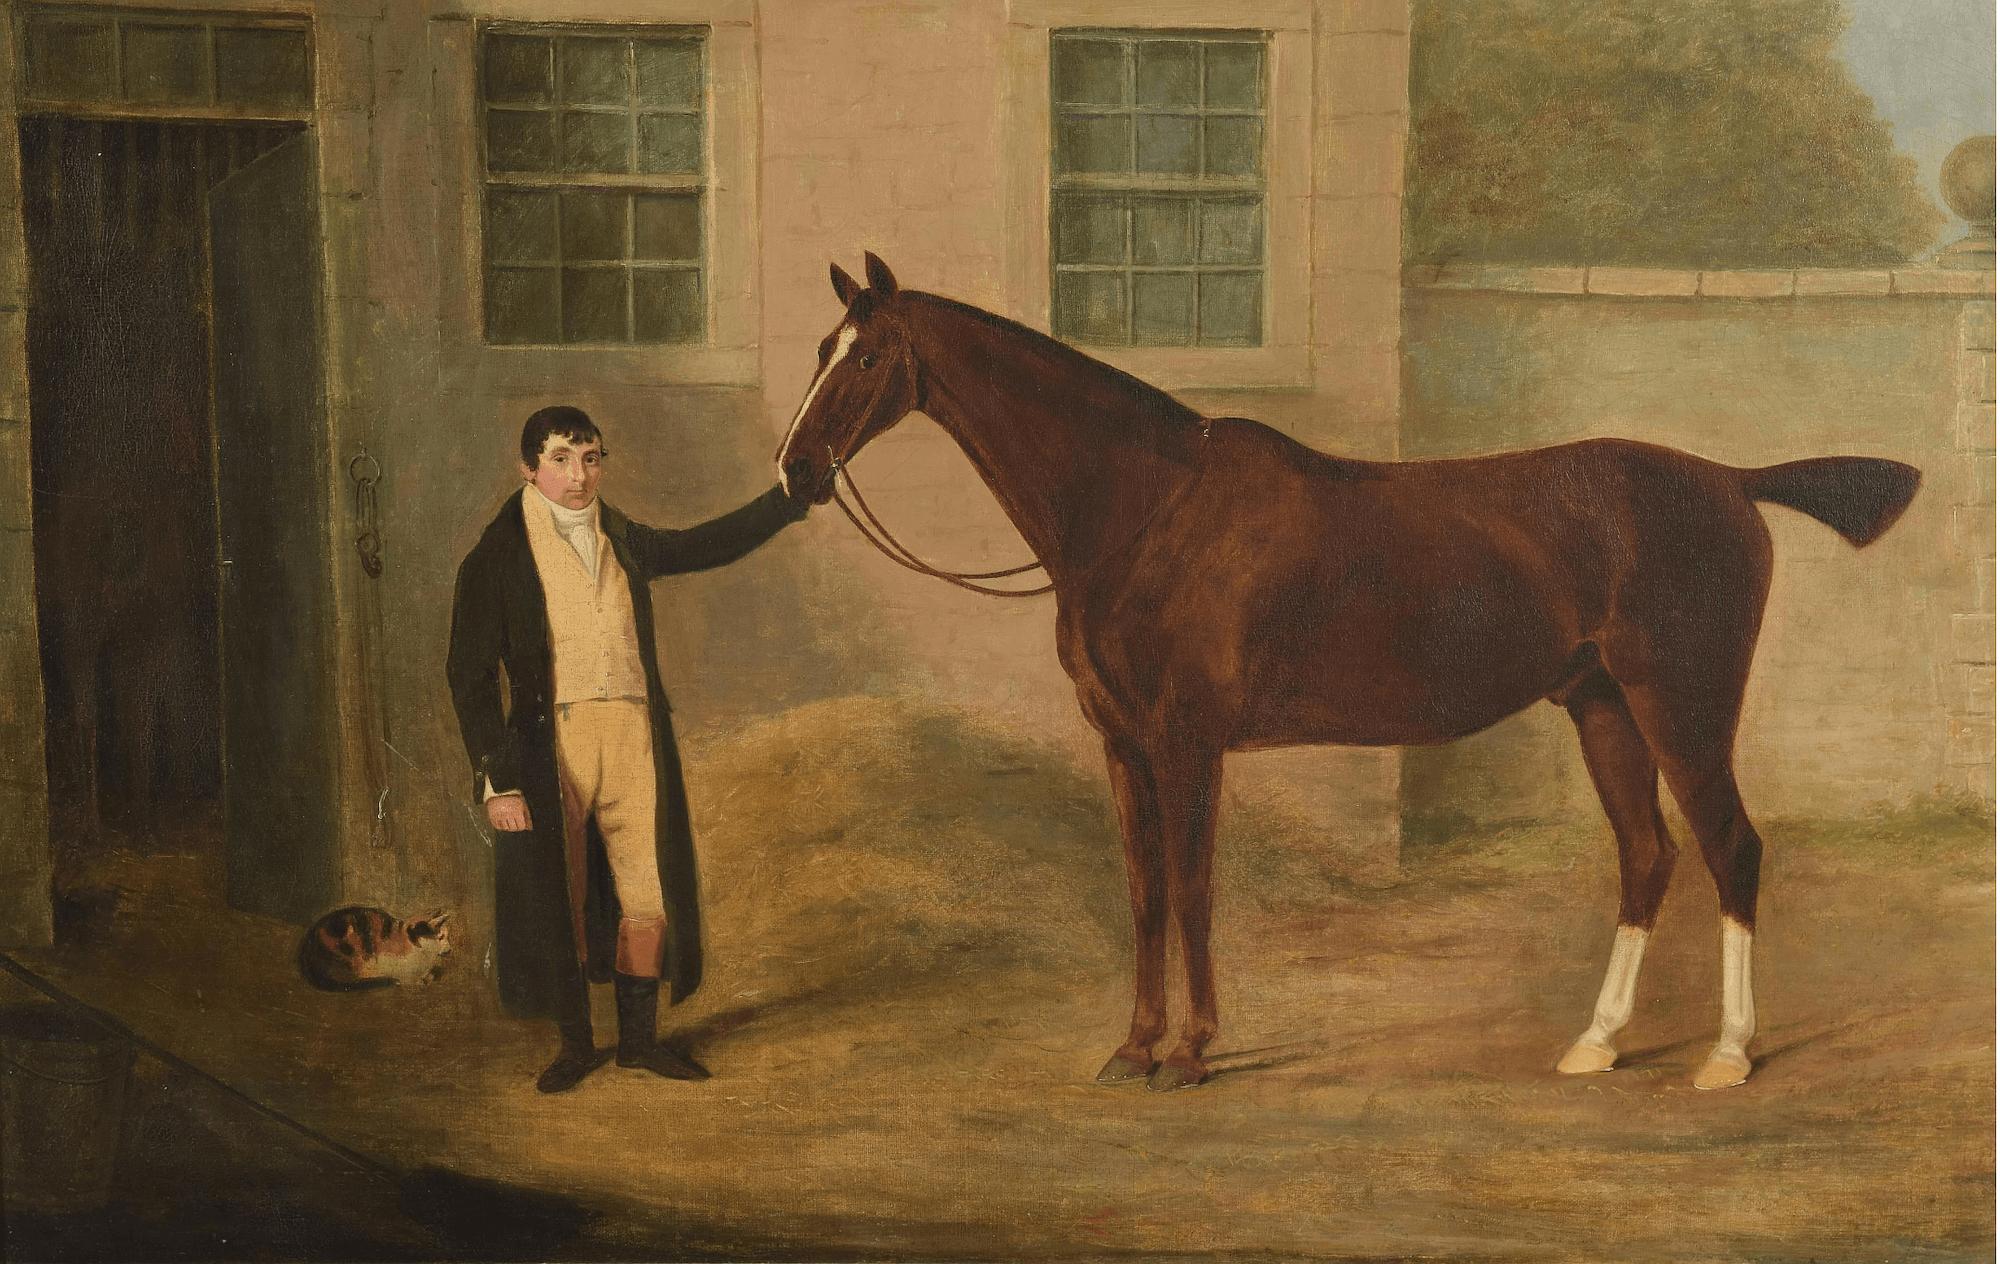 A stunning circa 1805 English equestrian oil on canvas painting firmly attributed to prominent late-Georgian period artist Benjamin Marshall portraying a dark bay thoroughbred horse with groom and calico cat outside architectural stable block